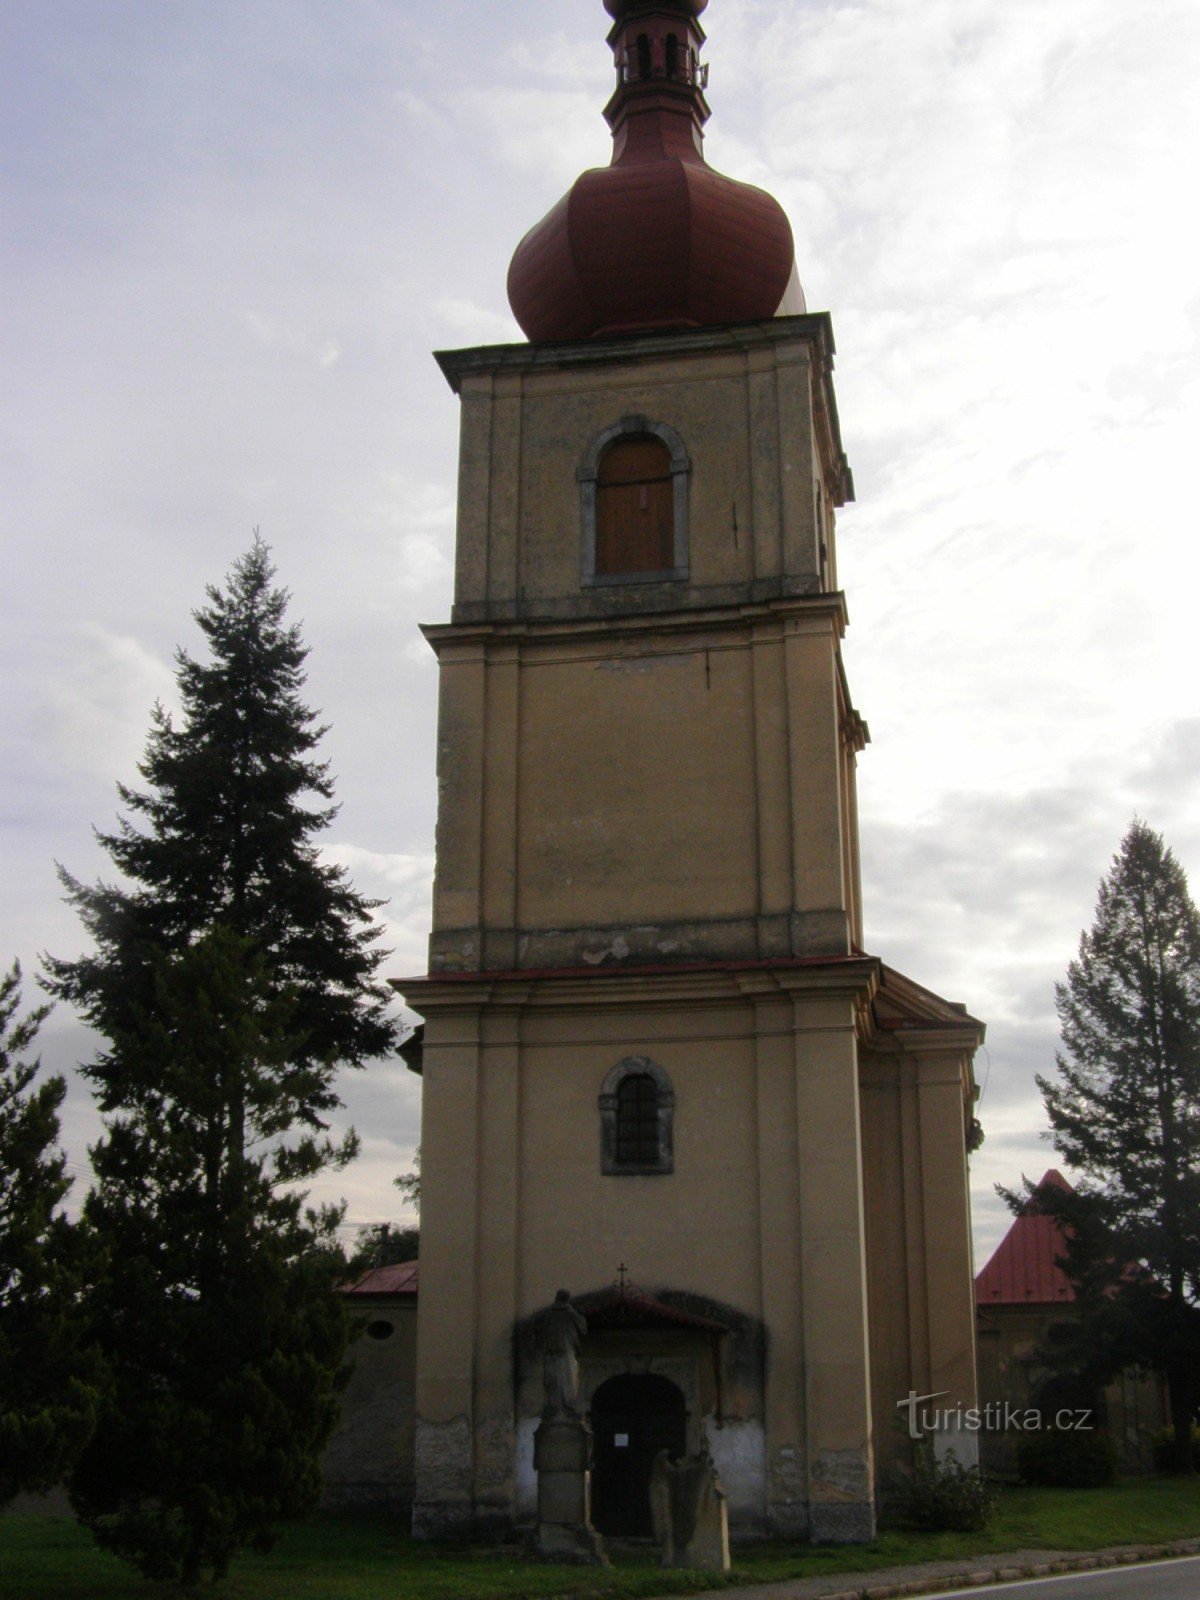 Chvalkovice - church of St. Lily